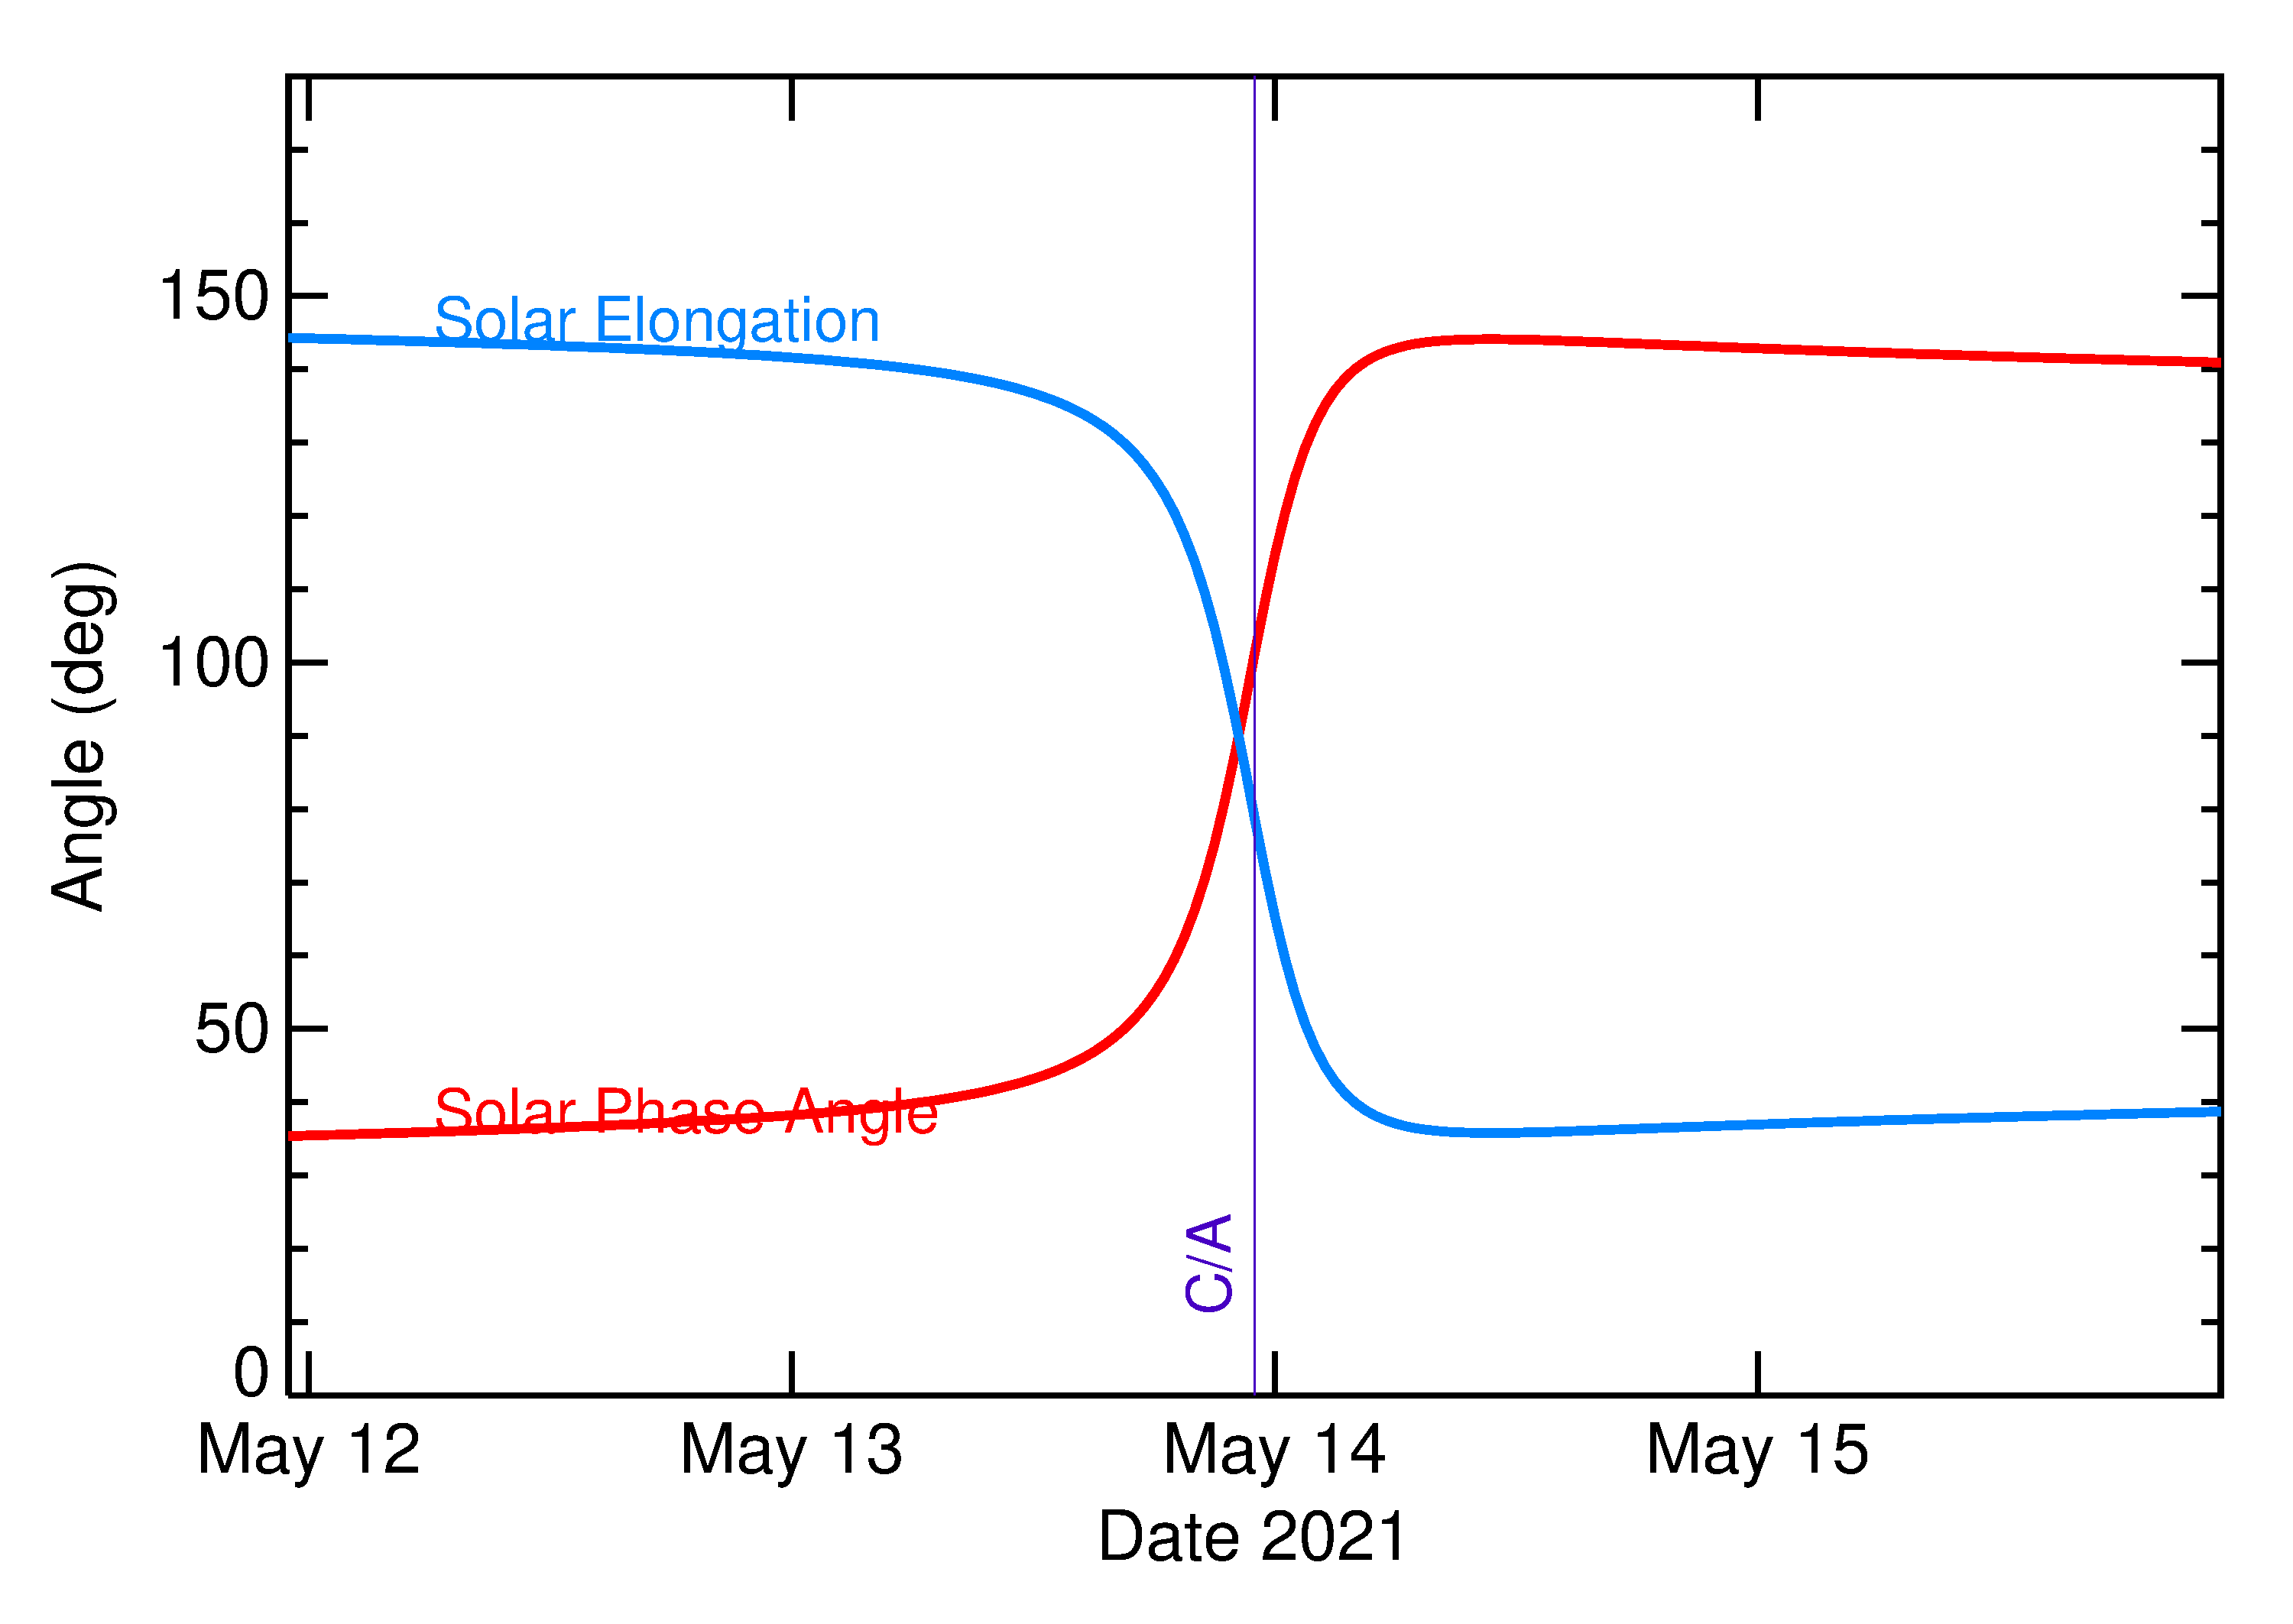 Solar Elongation and Solar Phase Angle of 2021 JB6 in the days around closest approach